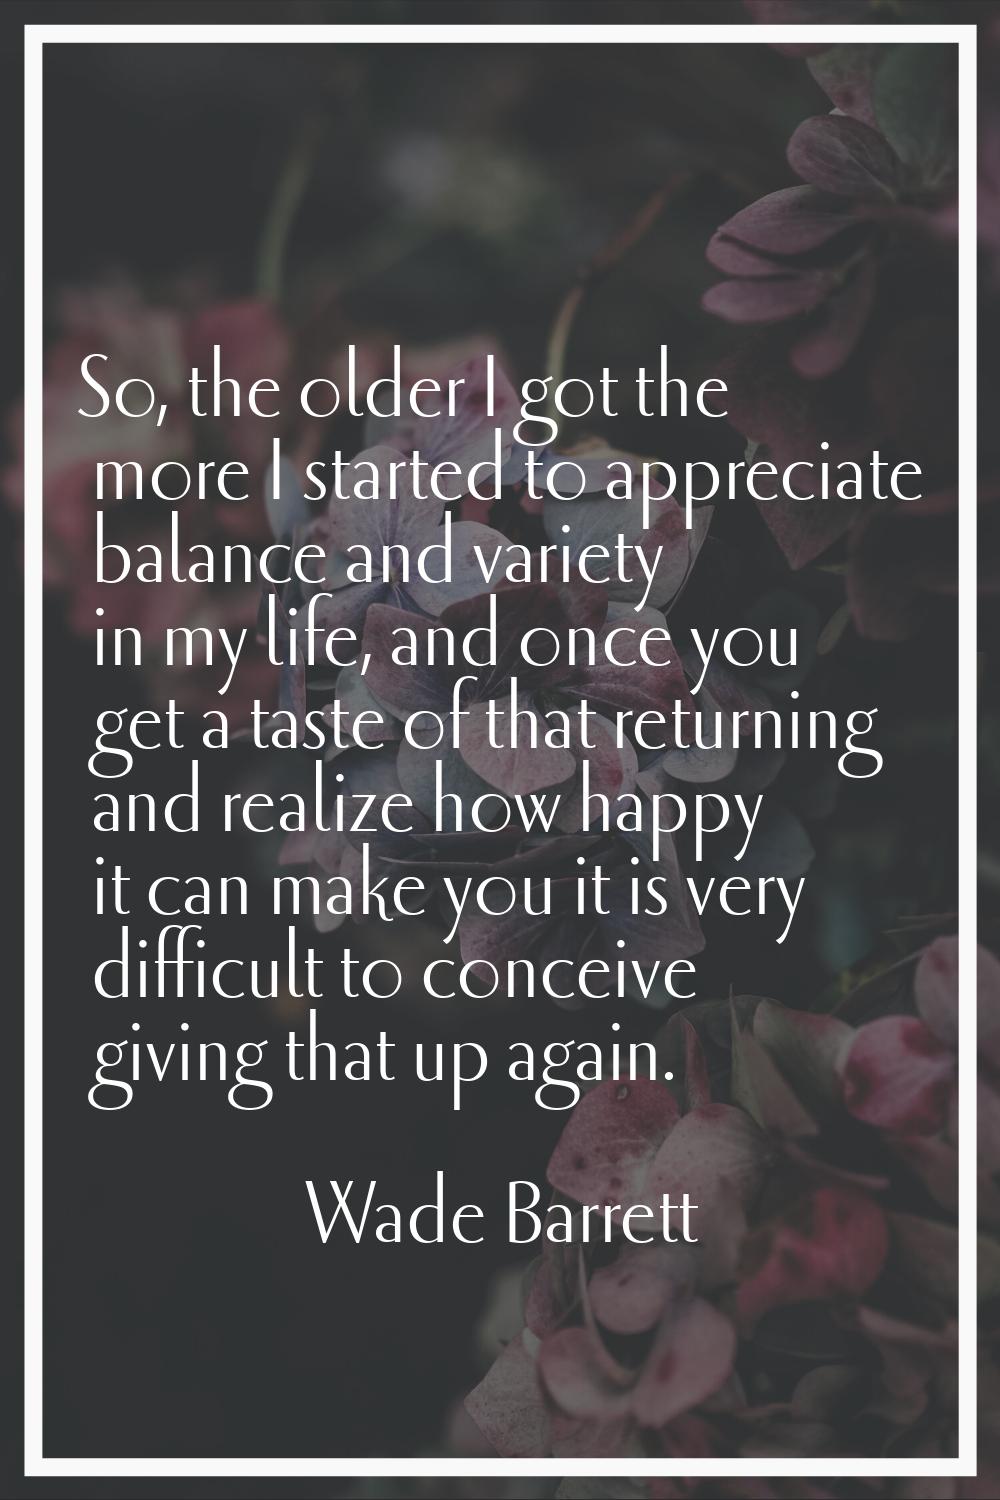 So, the older I got the more I started to appreciate balance and variety in my life, and once you g